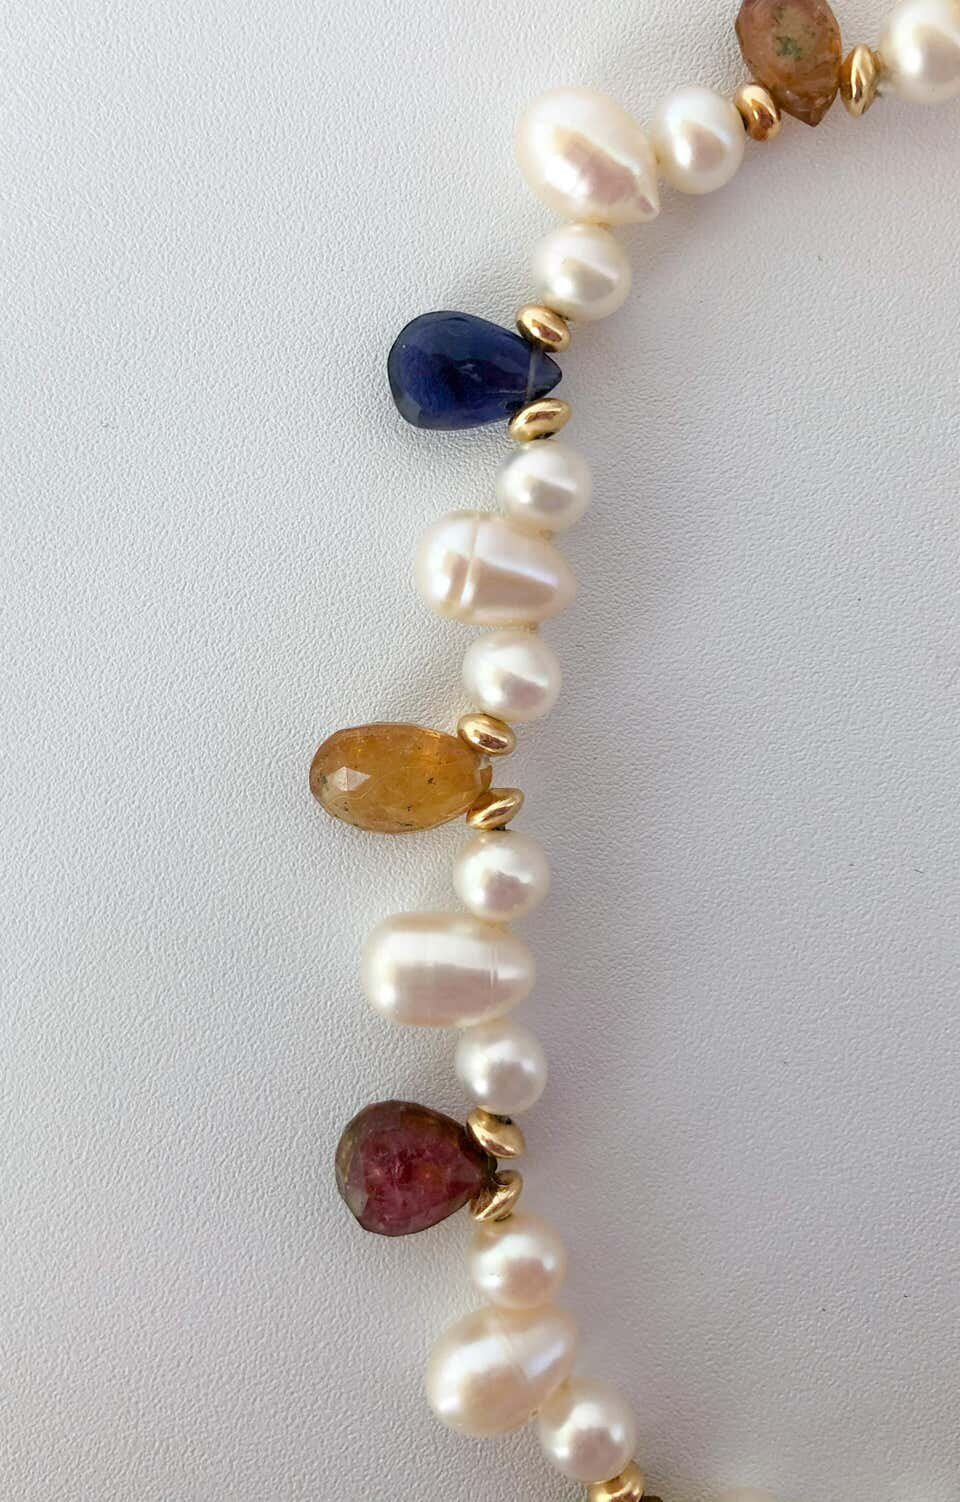 Marina J. Pet Collar/Necklace with Real Pearls, Iolite, Kyanite and Tourmaline